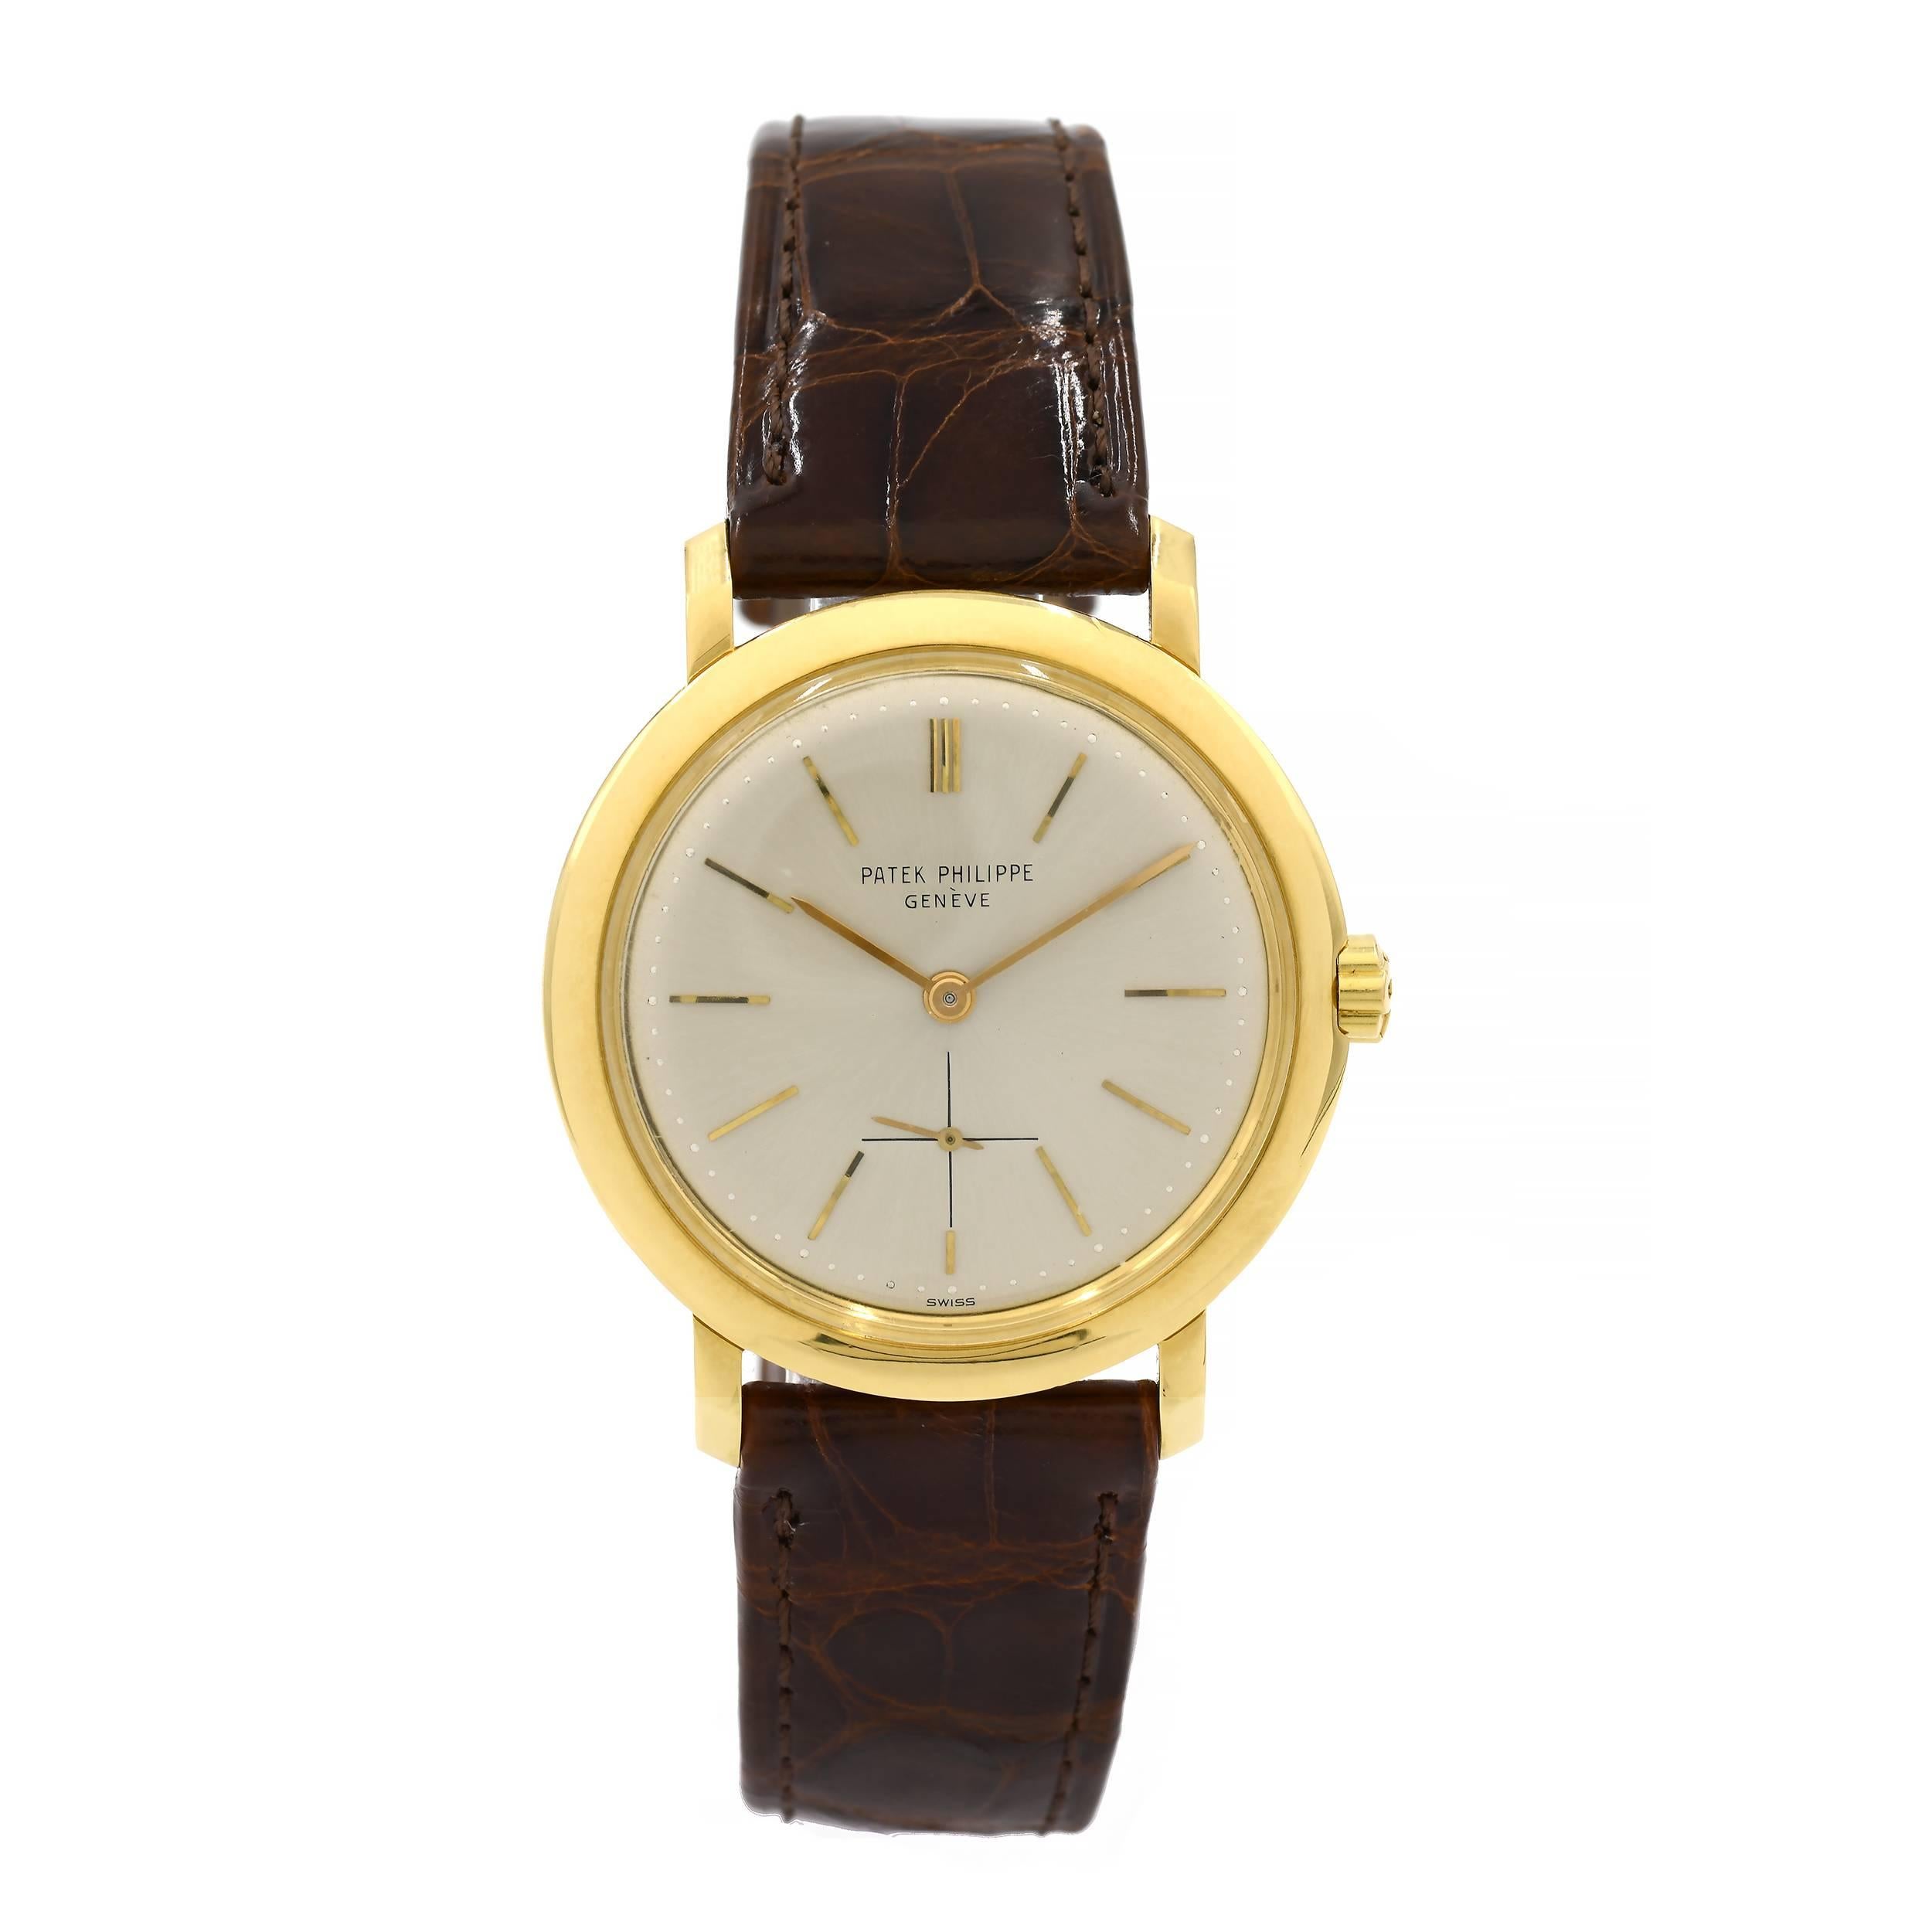  Patek Philippe  ref 3440 Calatrava wristwatch with original 18k Patek buckle and brand new Patek band. Screw down case back and automatic Patek movement.

18k yellow gold 
49.5 grams 
Length: 40.55mm 
Width: 34mm 
Band width at case: 18mm 
Case